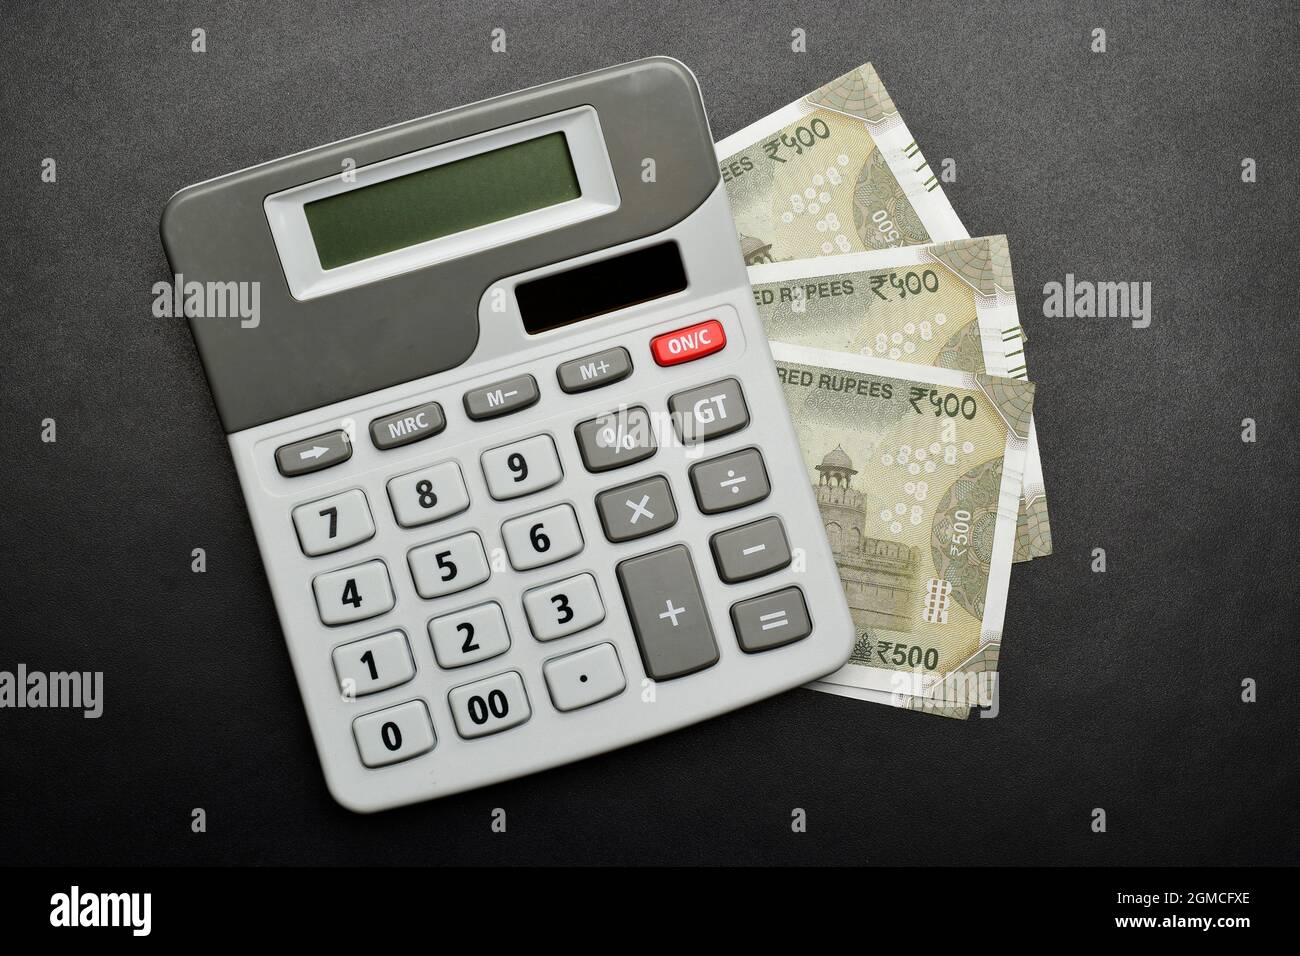 Calculator with Indian currency note Stock Photo